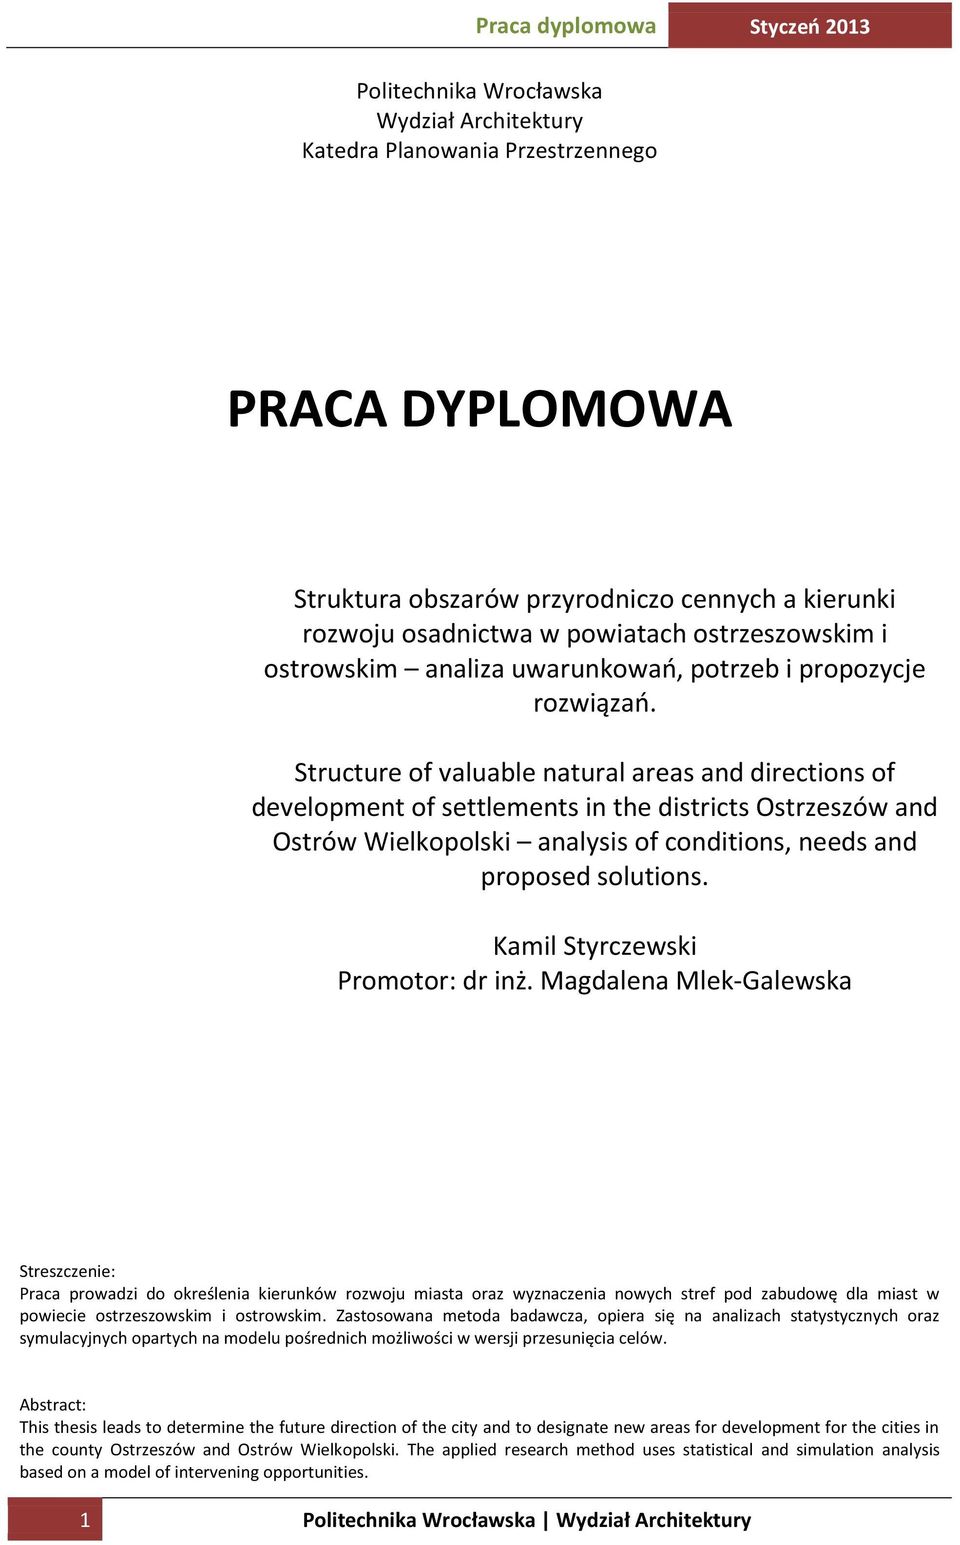 Structure of valuable natural areas and directions of development of settlements in the districts Ostrzeszów and Ostrów Wielkopolski analysis of conditions, needs and proposed solutions.